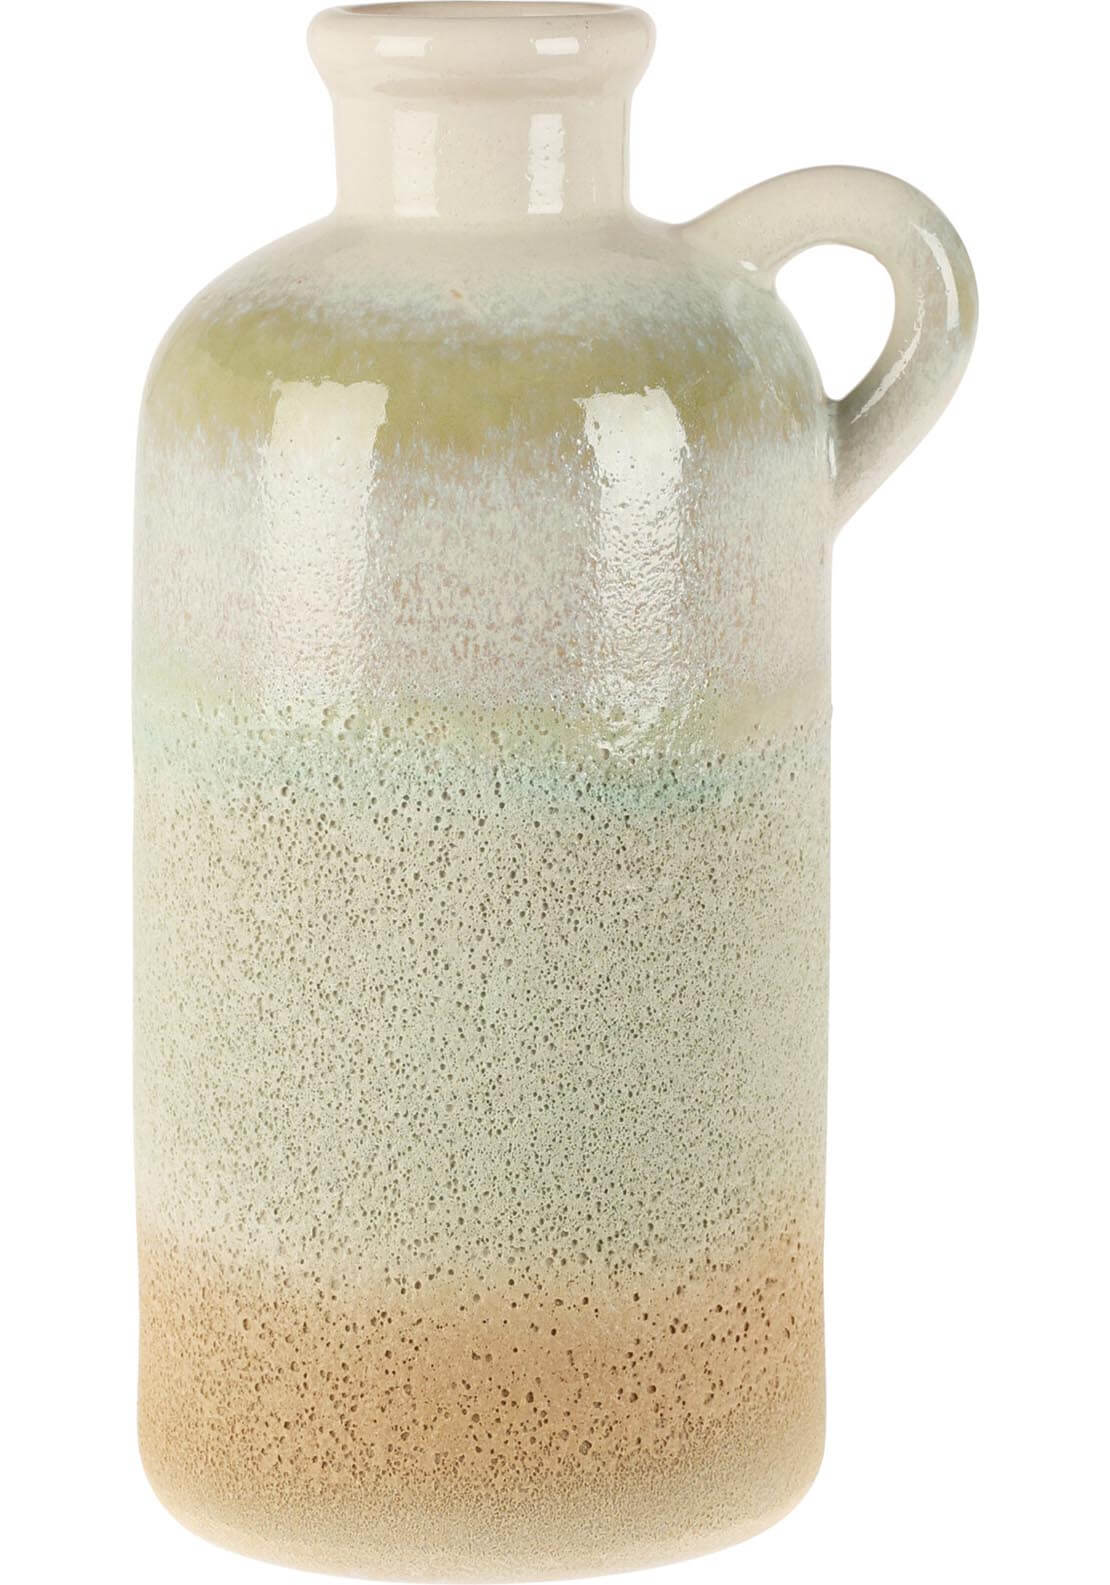 The Home Living Stoneware Vase 150mm x 125mm x 270mm 1 Shaws Department Stores